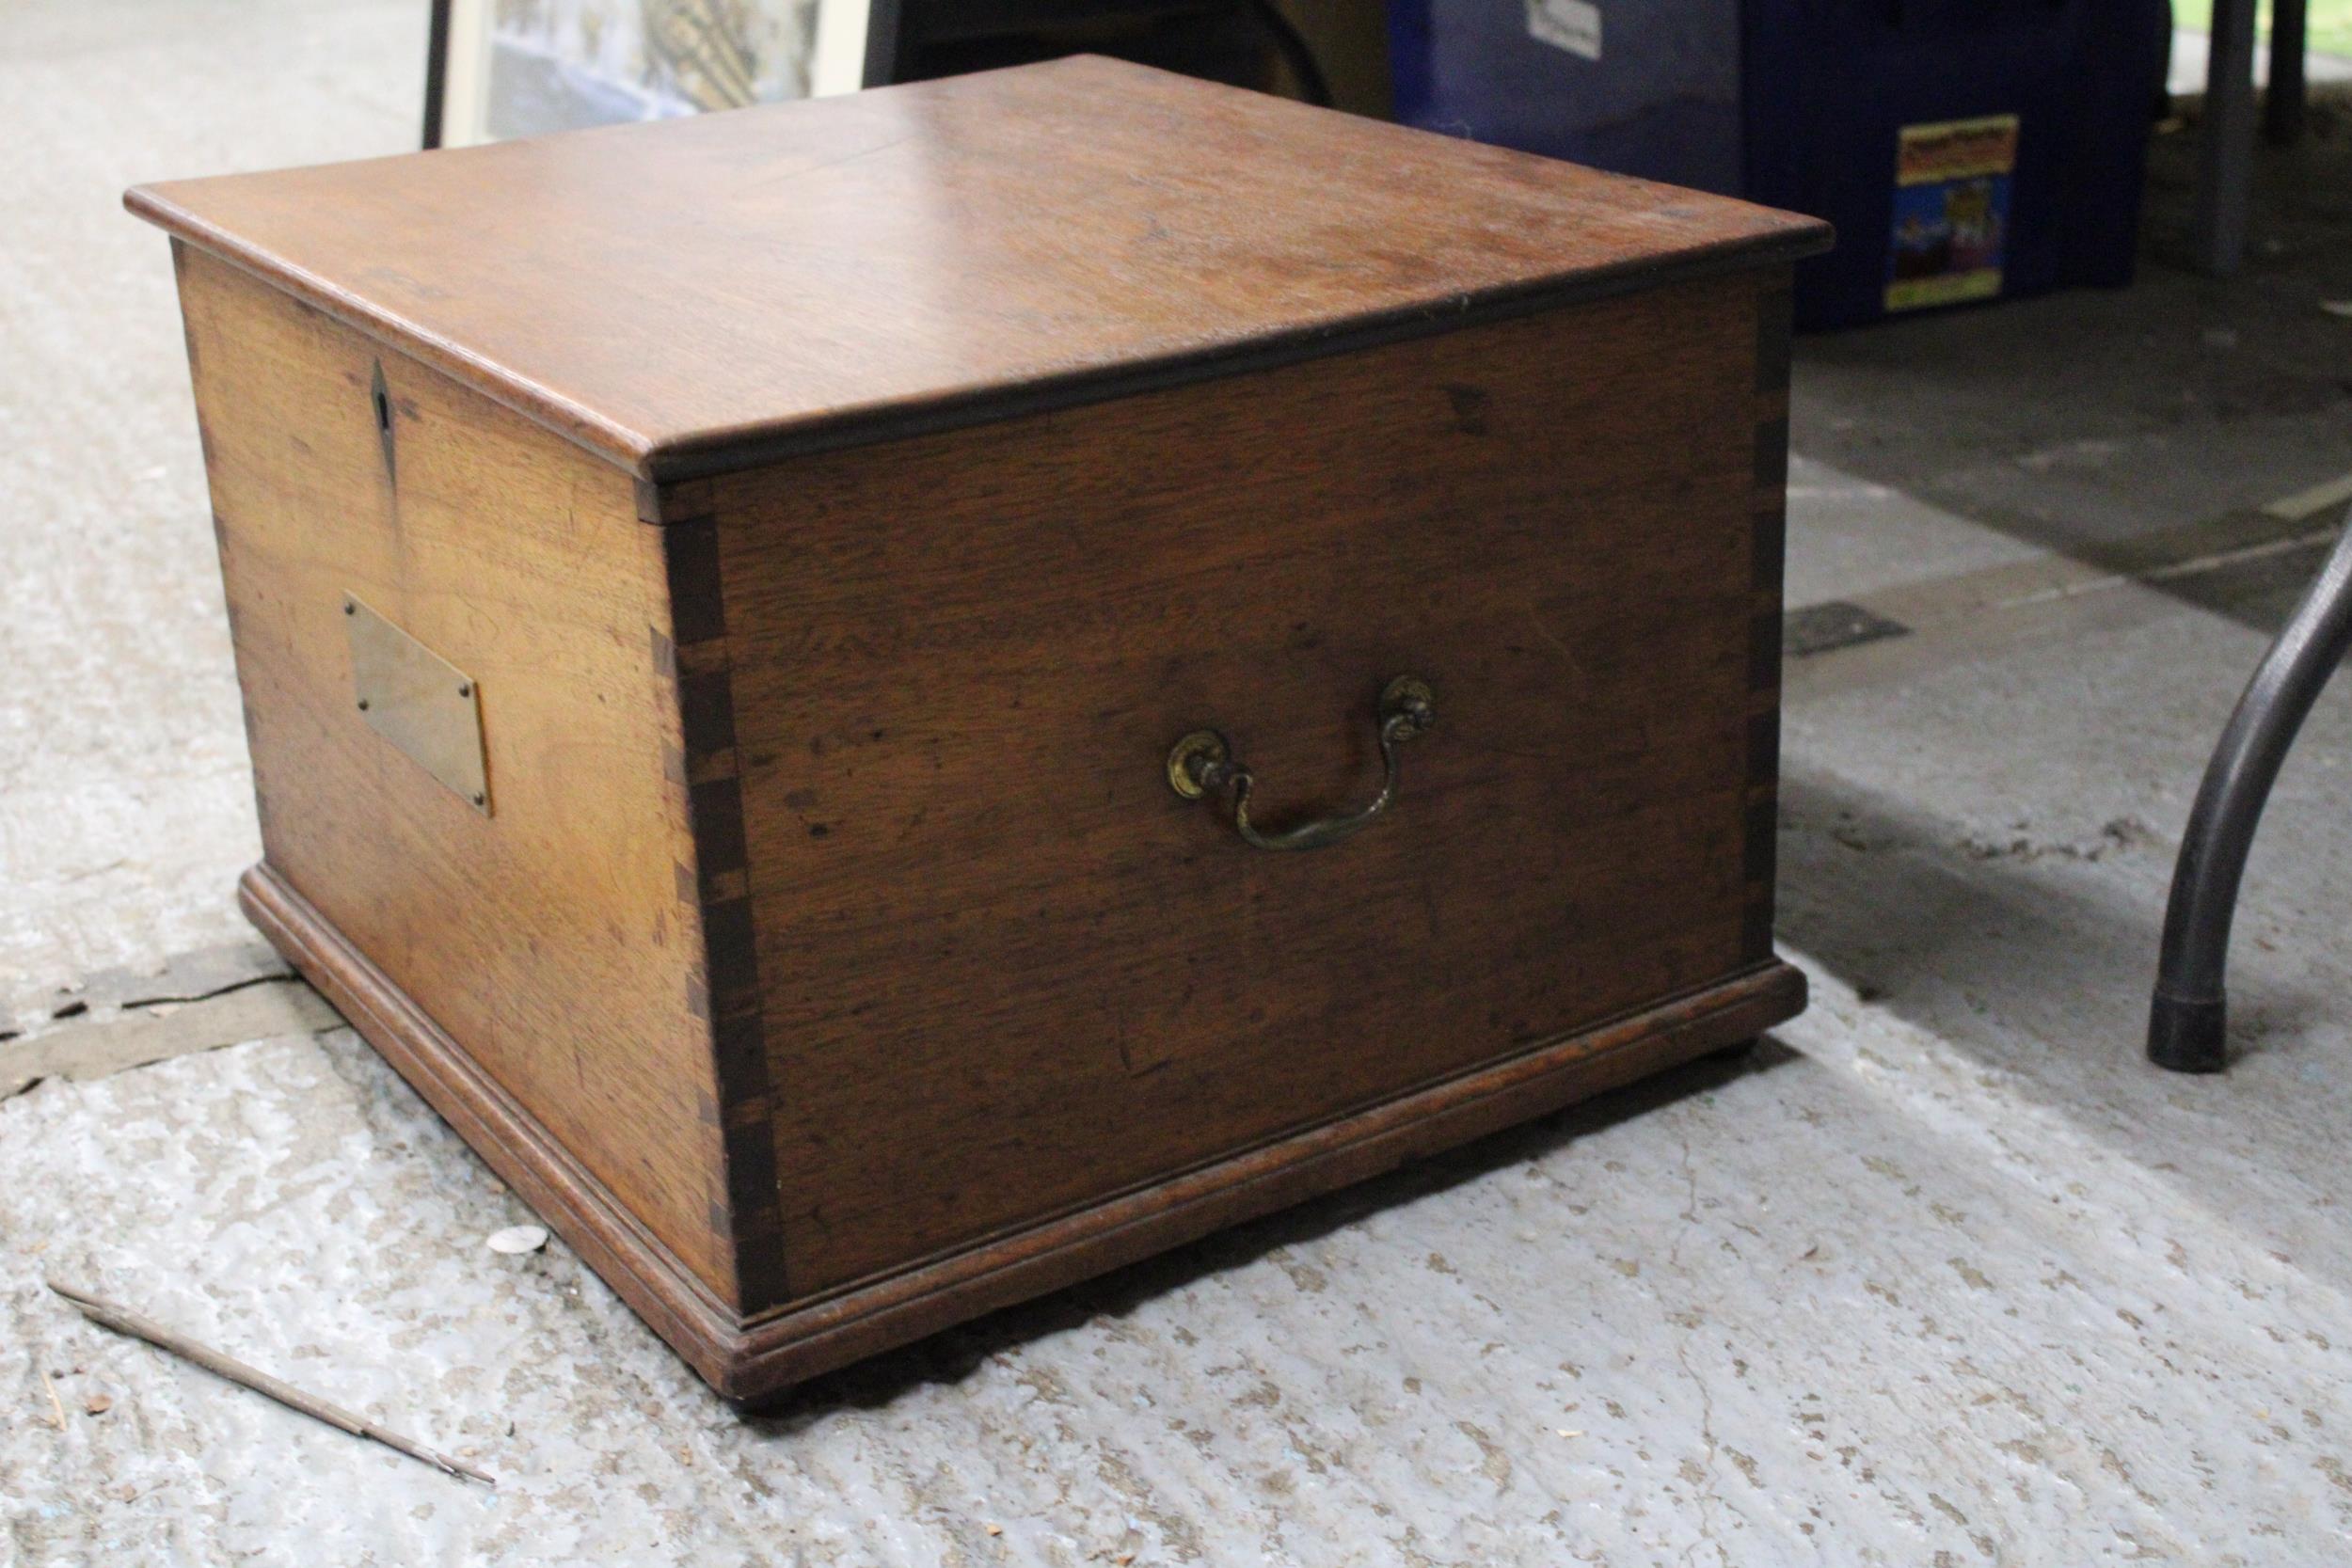 A LARGE VINTAGE MAHOGANY BOX WITH BRASS PLAQUE AND DOVETAIL JOINTS, HEIGHT 33CM, WIDTH 49CM, DEPTH - Image 4 of 4